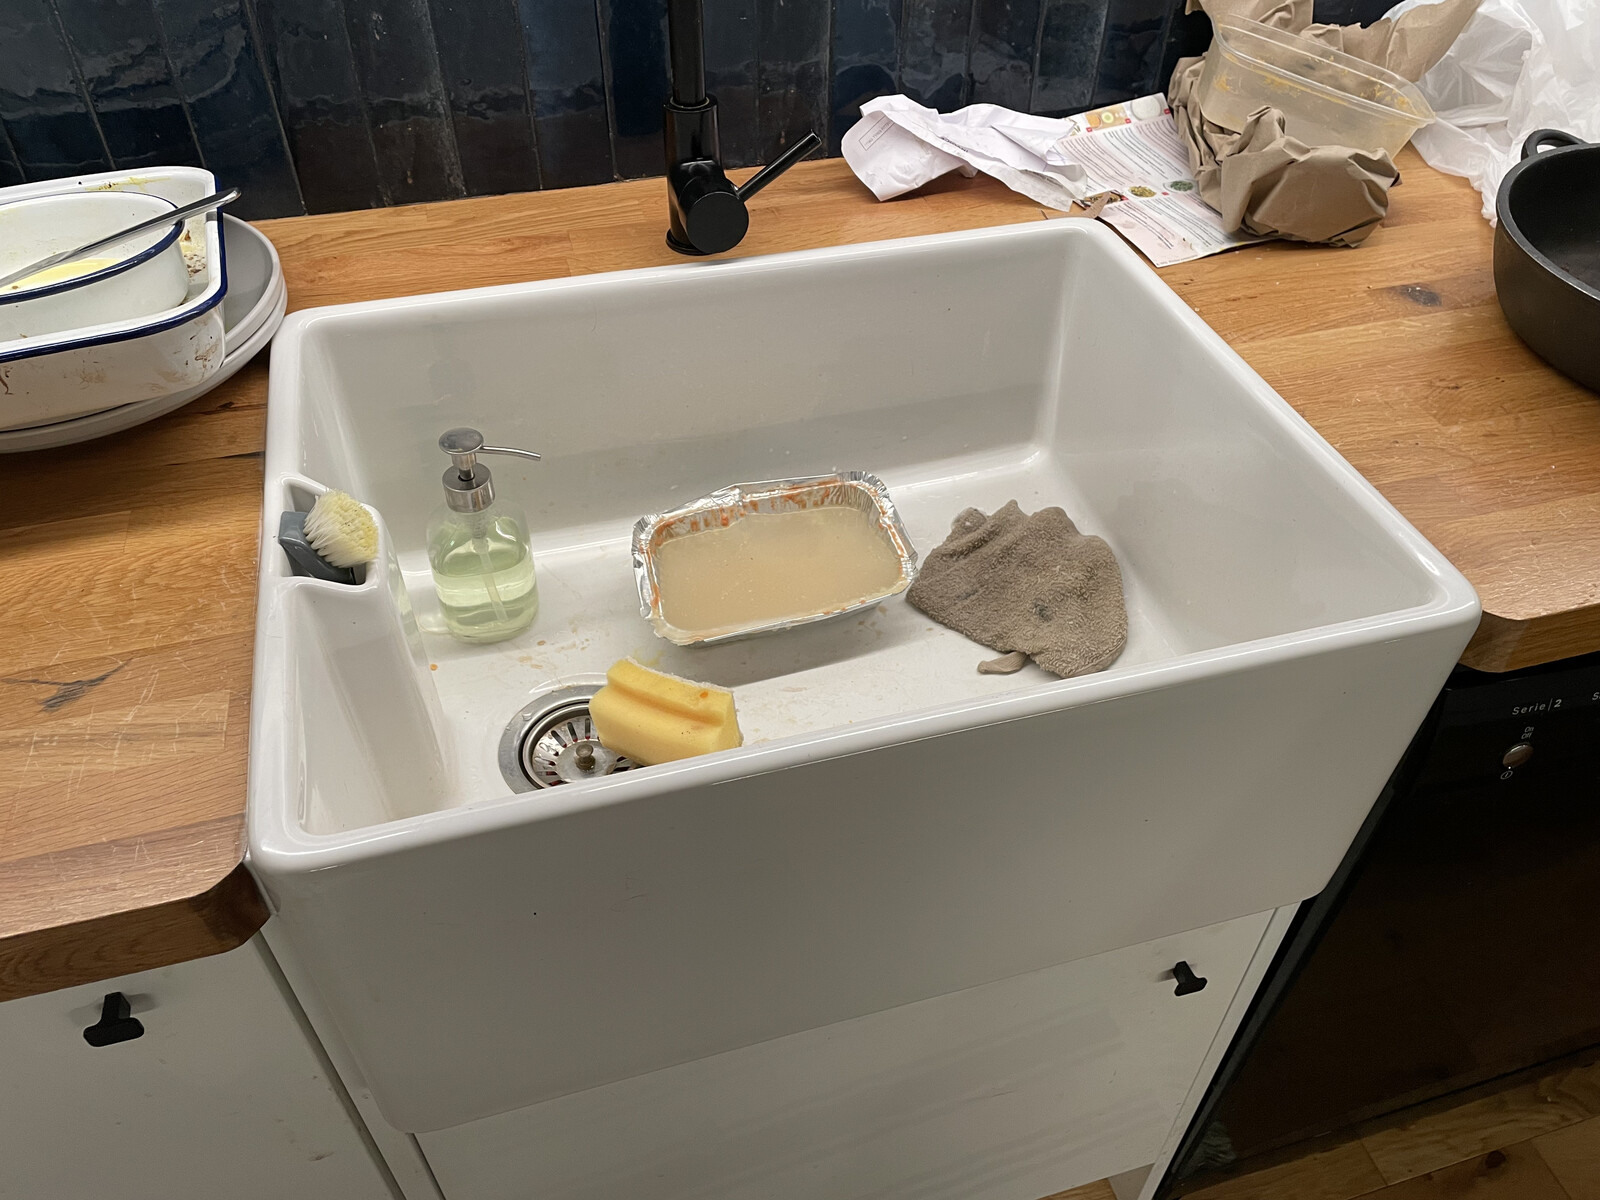 An apron-fronted sink in a wood countertop with a bunch of rubbish & dirty dishes lying around it